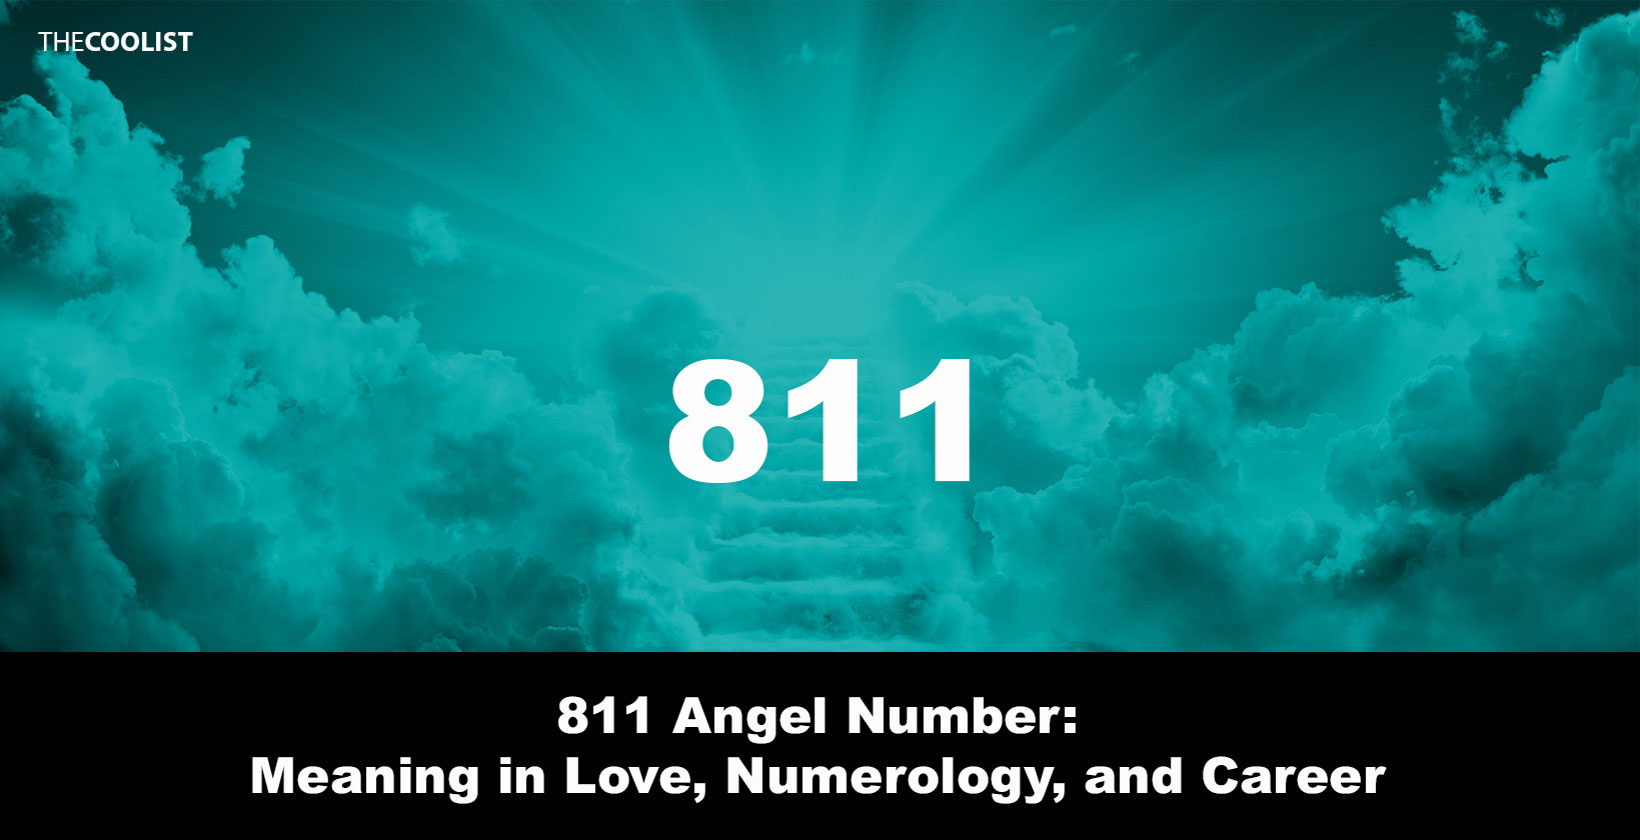 811 Angel Number: Meaning, Numerology, and Why You're Seeing It